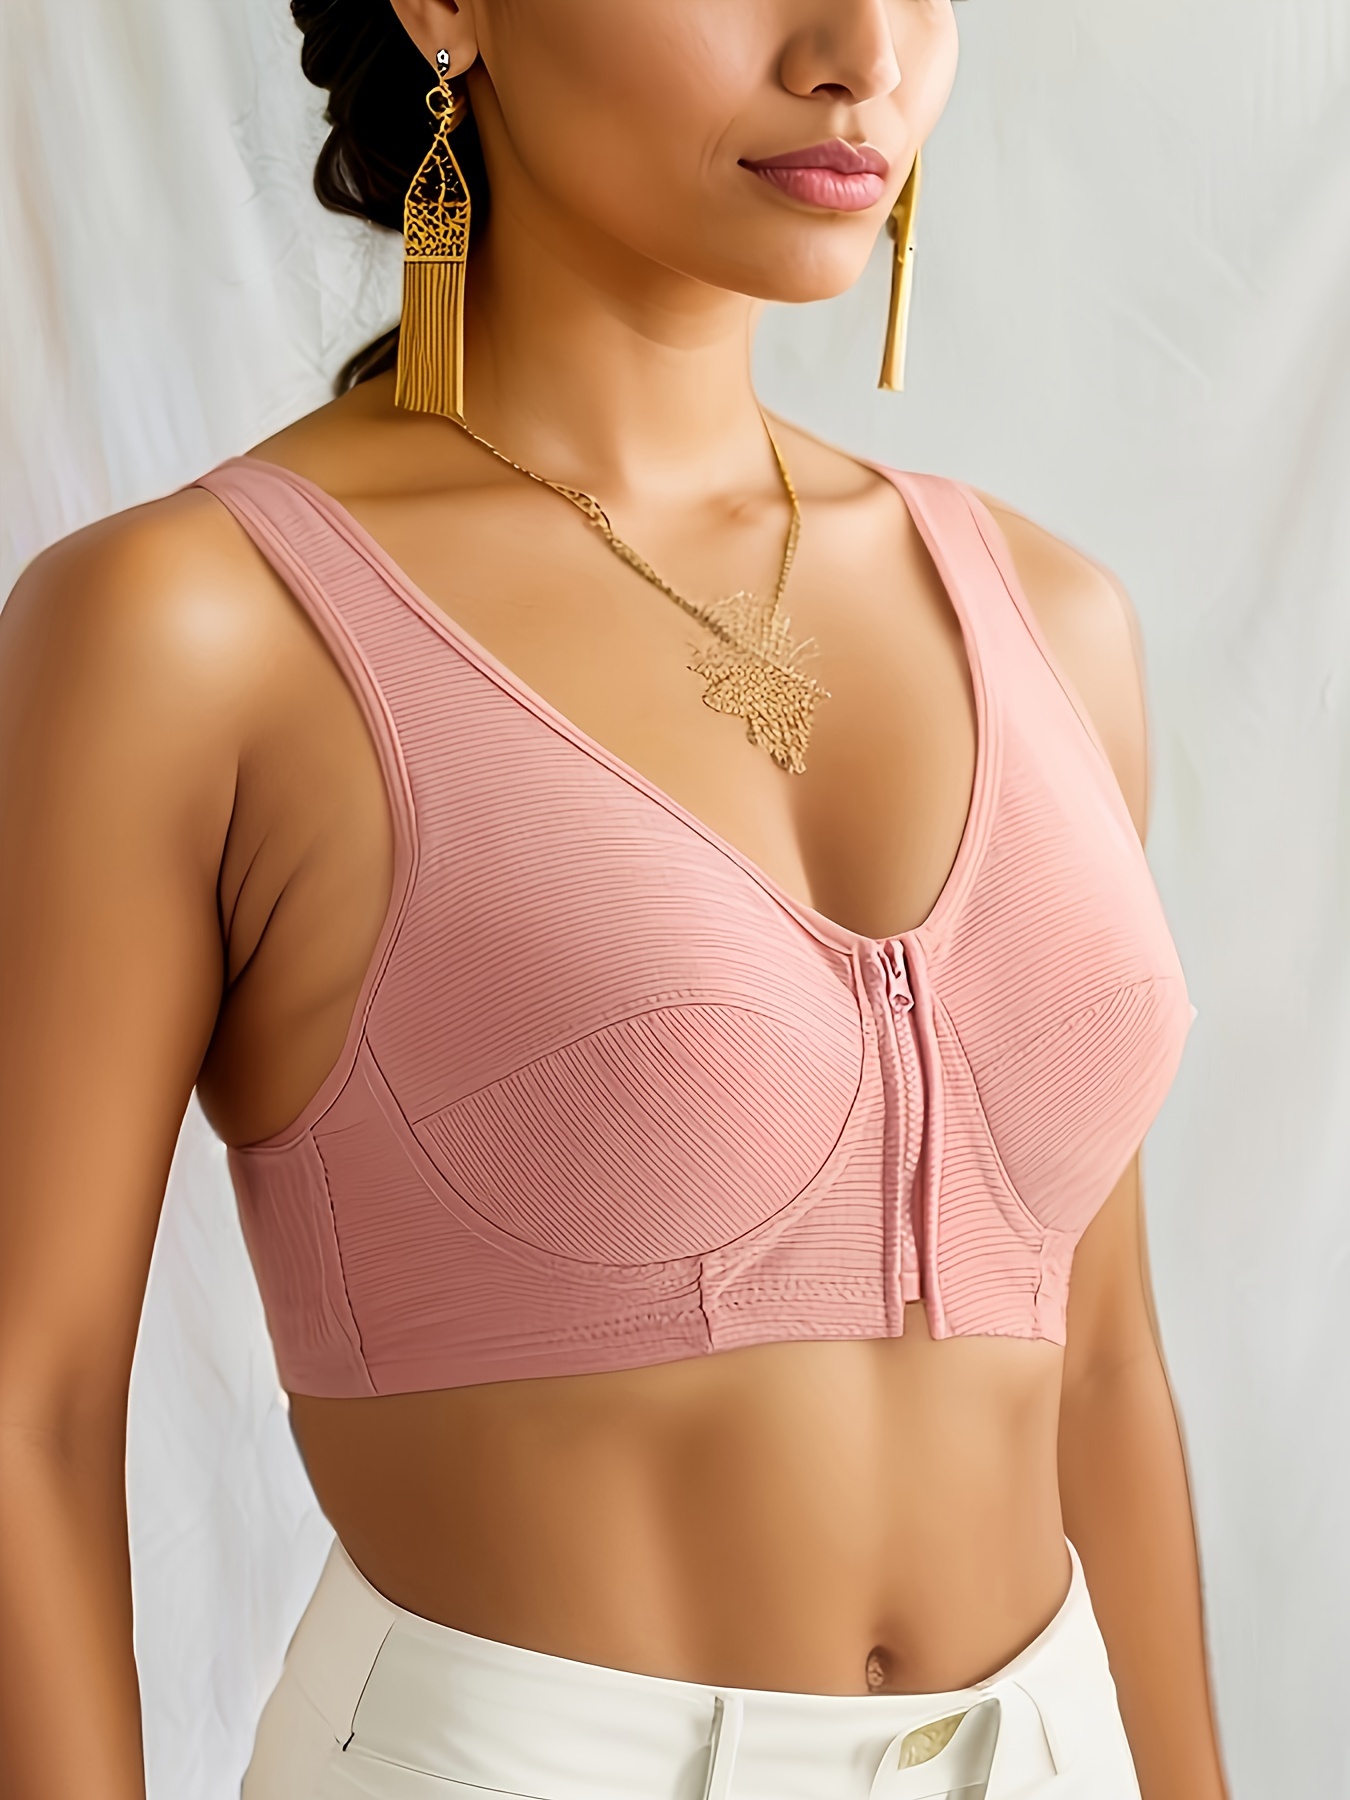 nsendm Female Underwear Adult Womens Bras Comfortable Front Closure Women's  Comfortable Large Size Front Open Button Middle and Old Age Work Out(Rose  Gold, 36) 